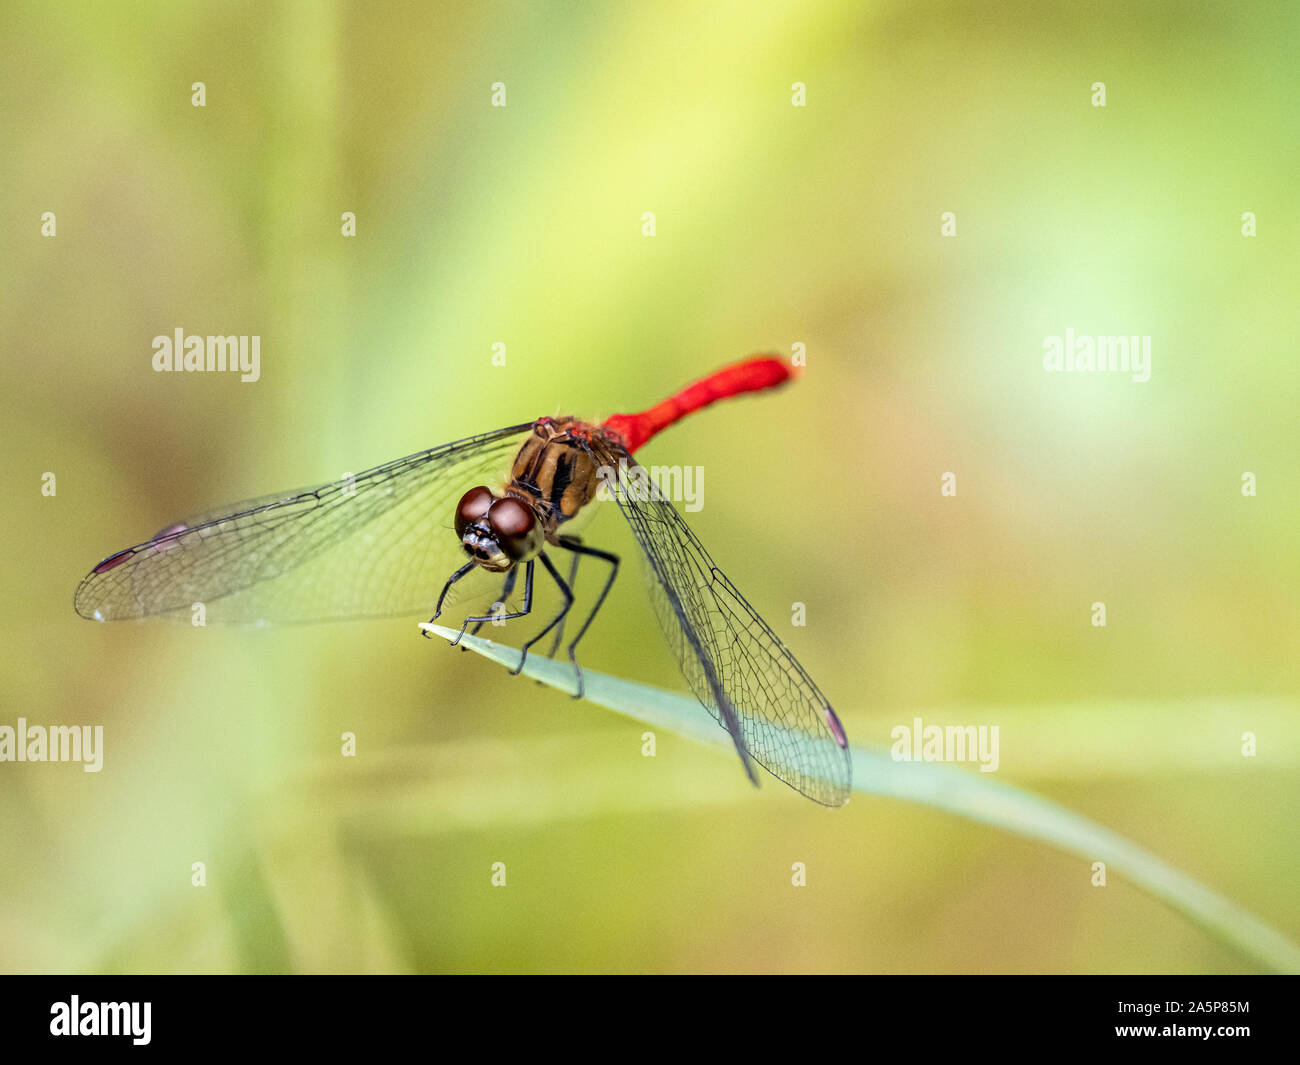 Japanese sympetrum risi yosico dragonflies, part of a family of dragonflies known as darters or meadowhawks, perches on a leaf in a Japanese park. Stock Photo